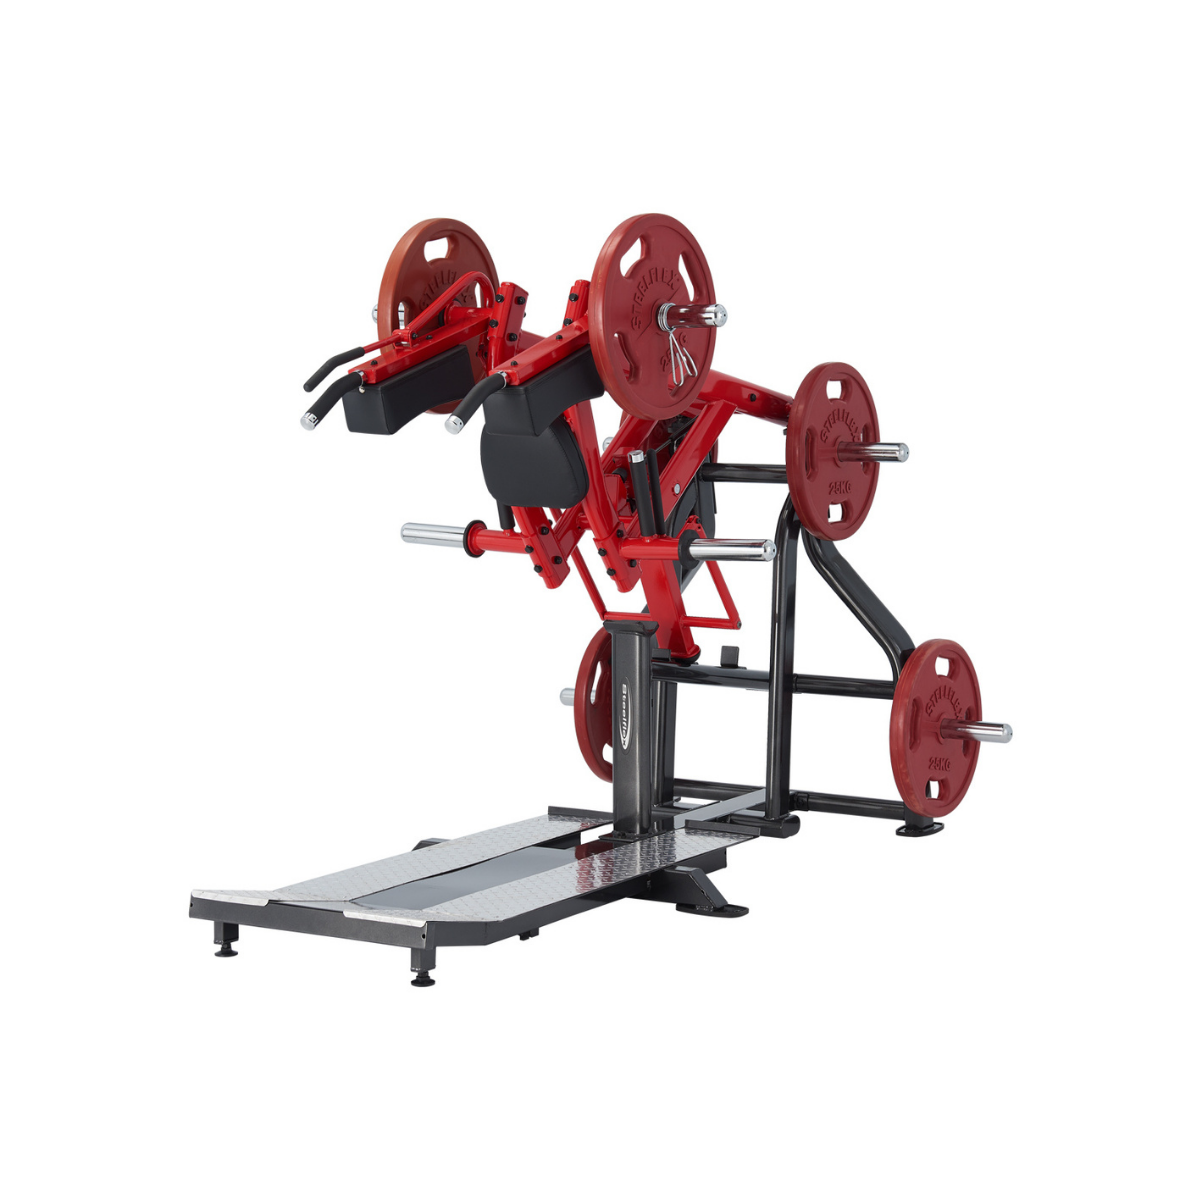 Steelflex Isometric Commercial Plate Loaded Standing Squat Machine